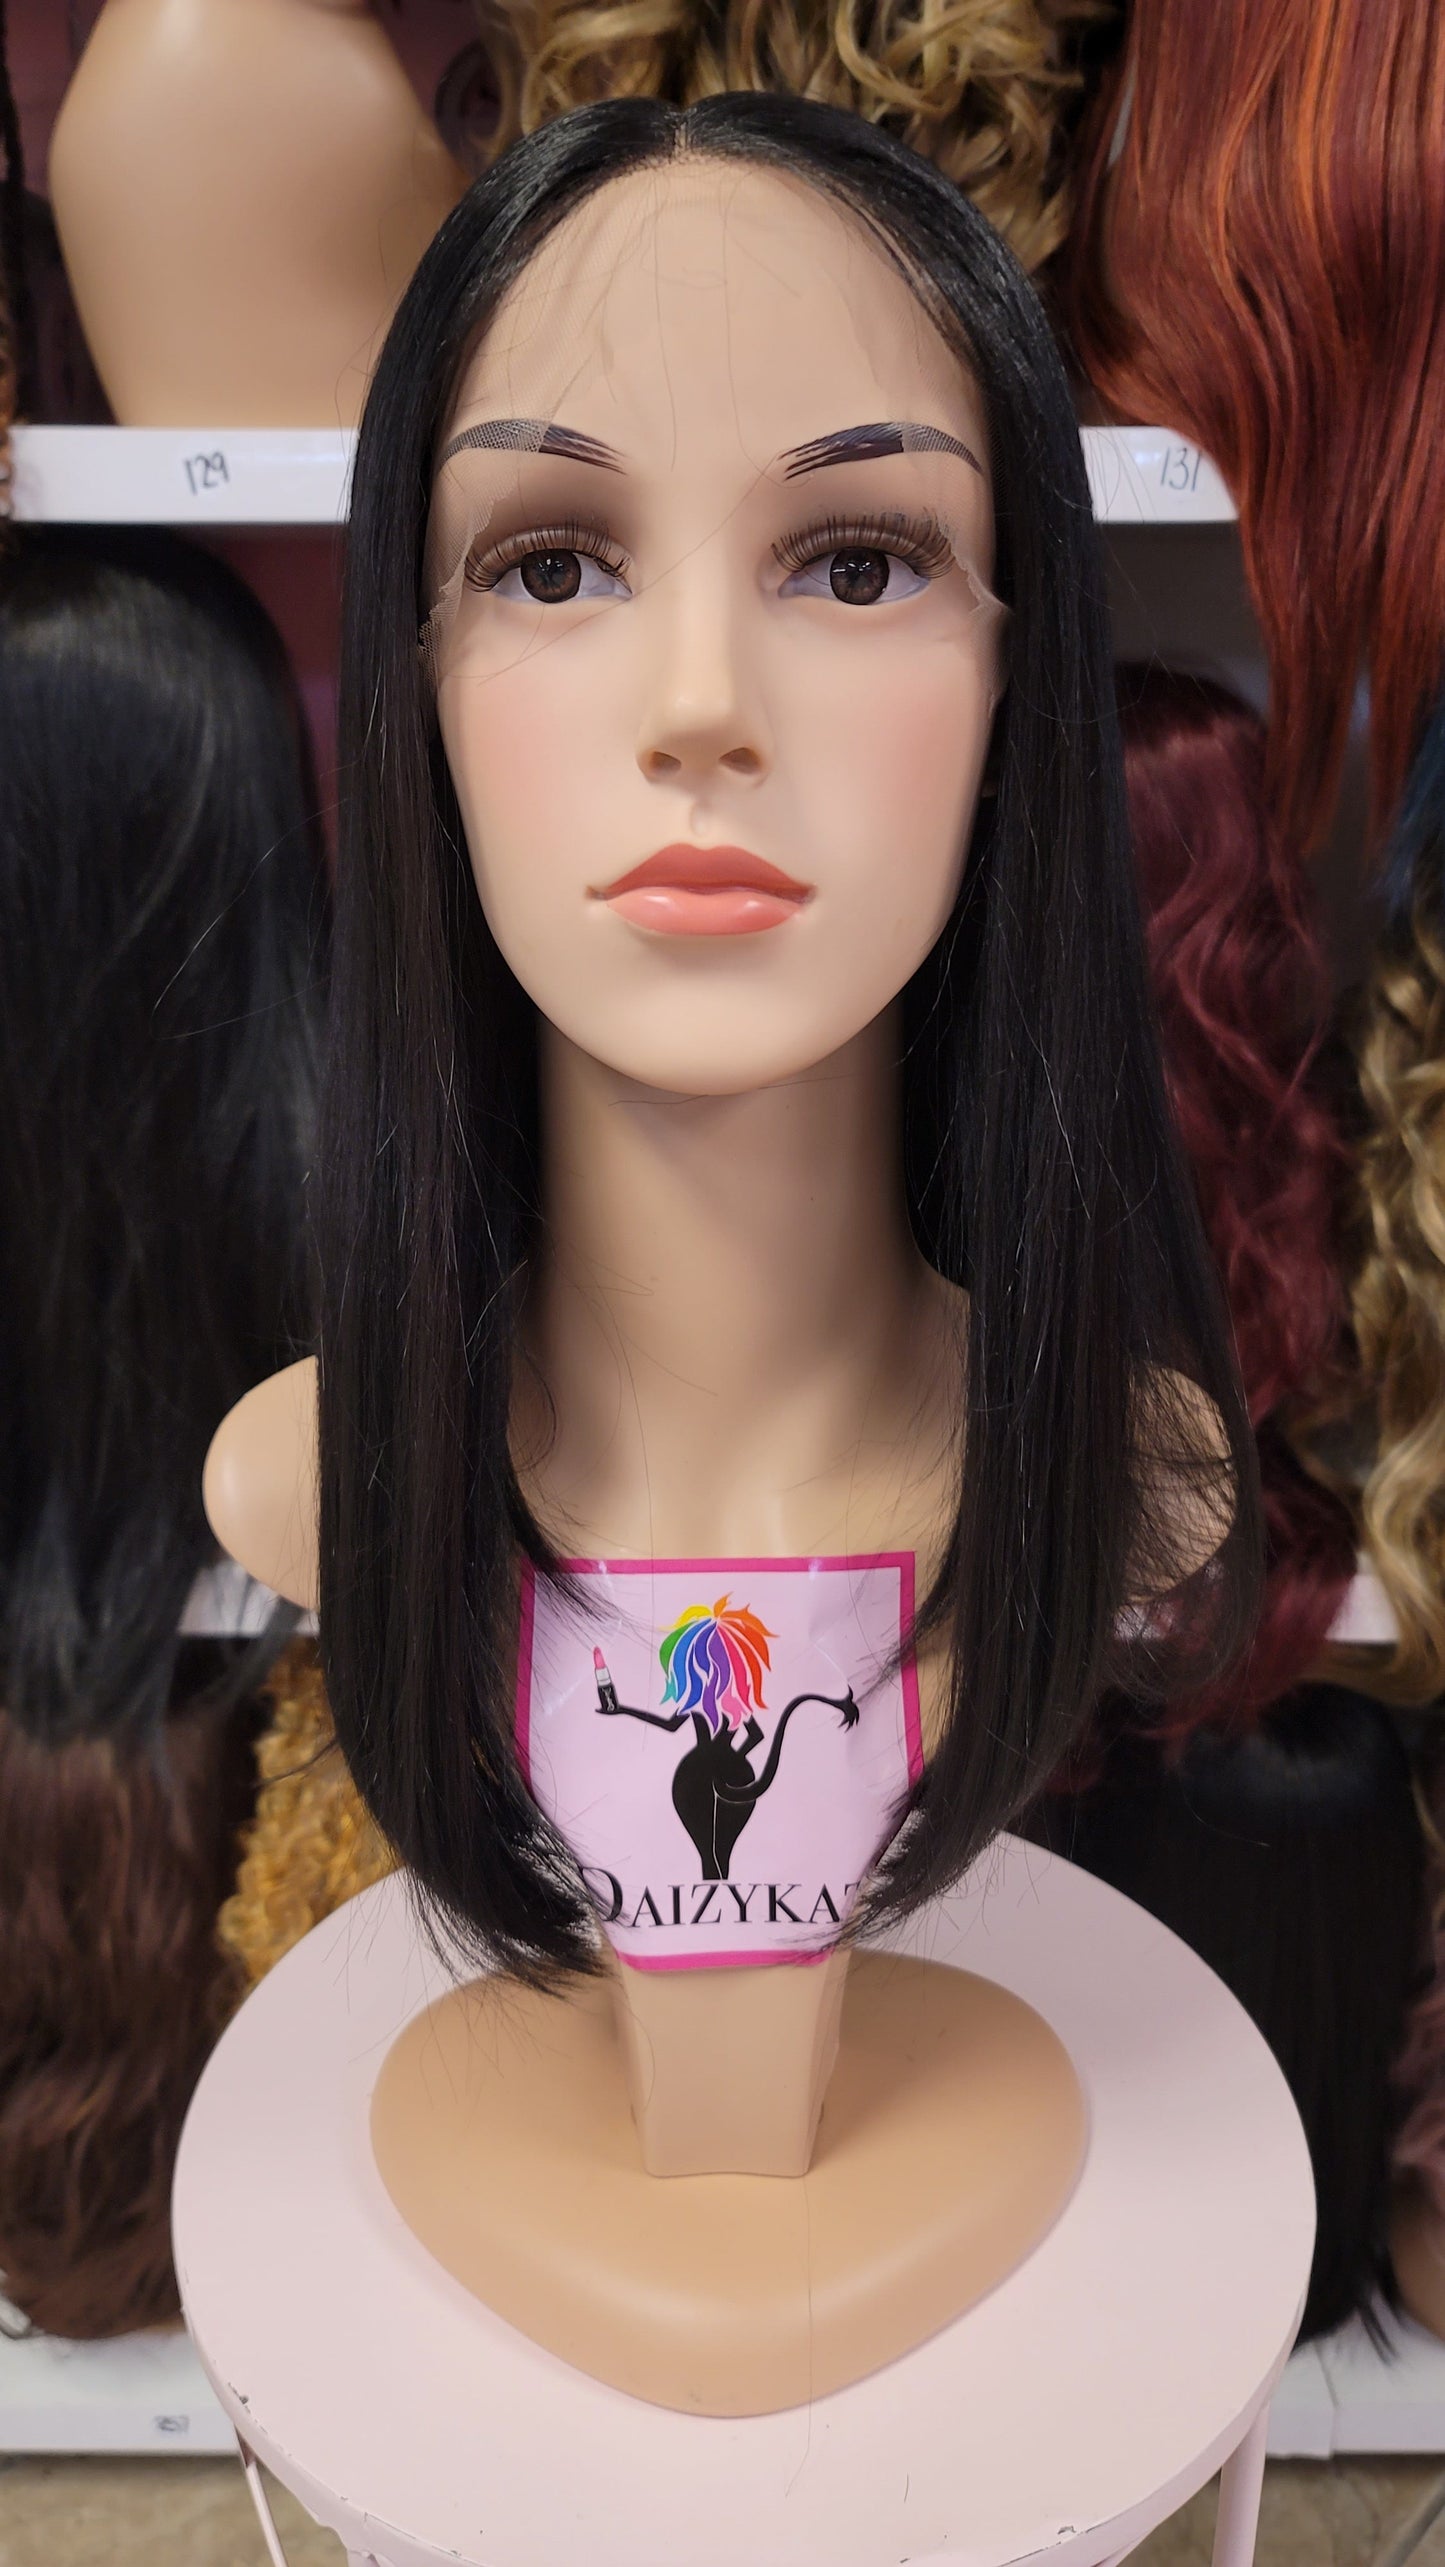 484 JACKIE - Middle Part Lace Front Wig - 1B - DaizyKat Cosmetics 484 JACKIE - Middle Part Lace Front Wig - 1B DaizyKat Cosmetics Wigs